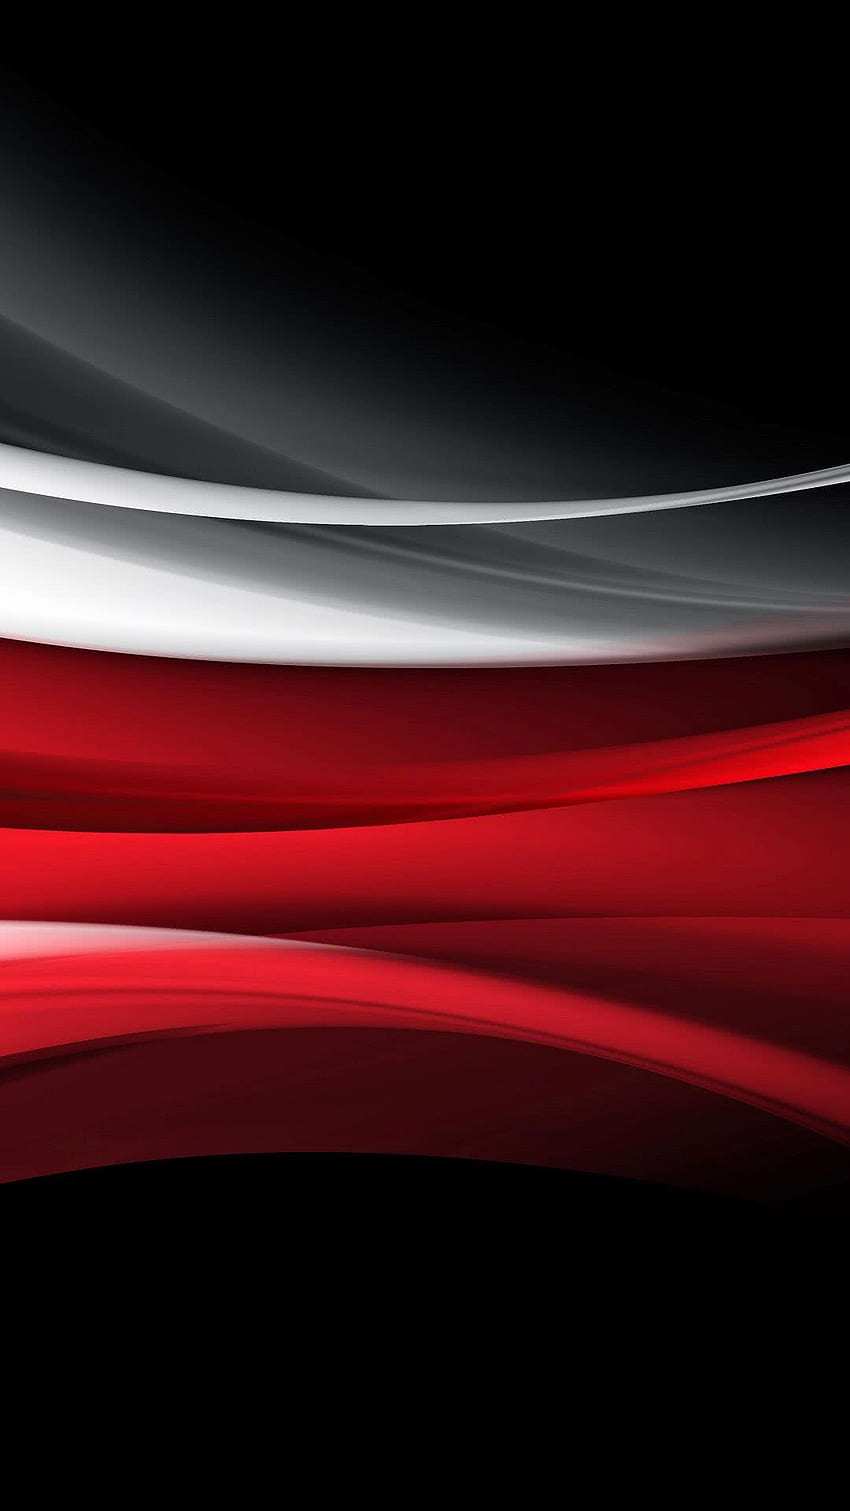 A black background with red and white lines photo  Free 3d Image on  Unsplash